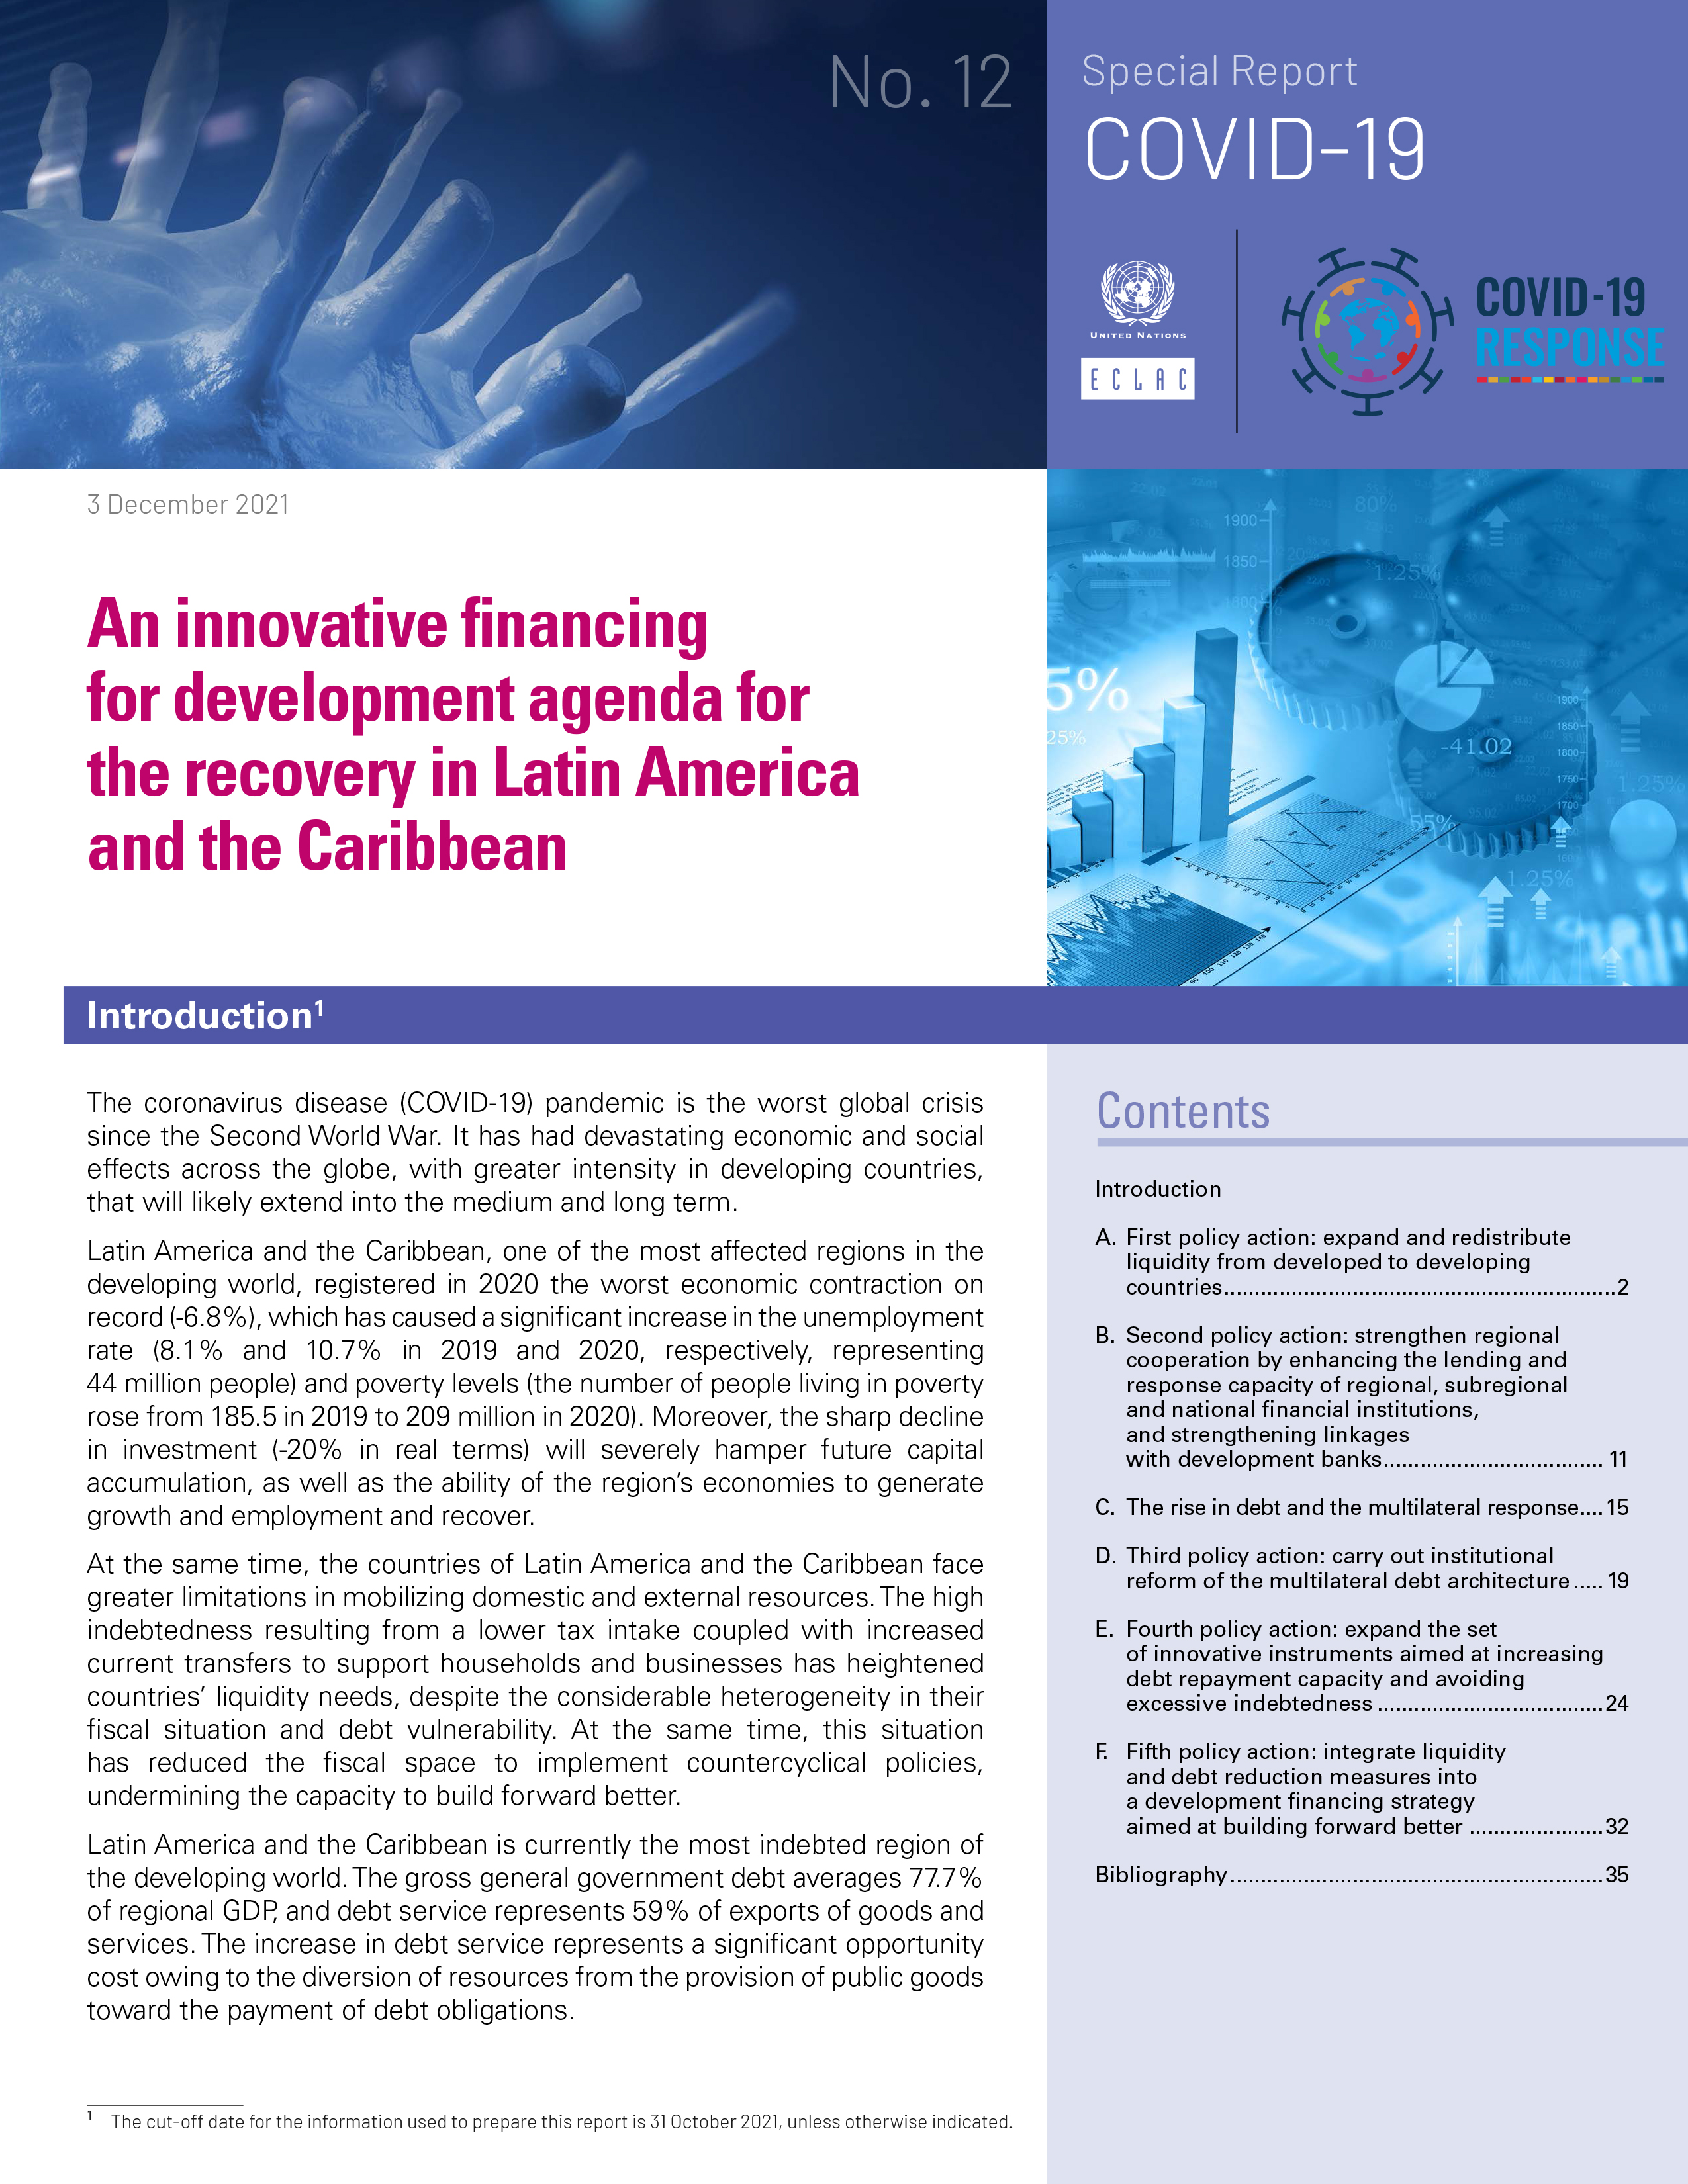 image of An Innovative Financing for Development Agenda for The Recovery in Latin America and the Caribbean